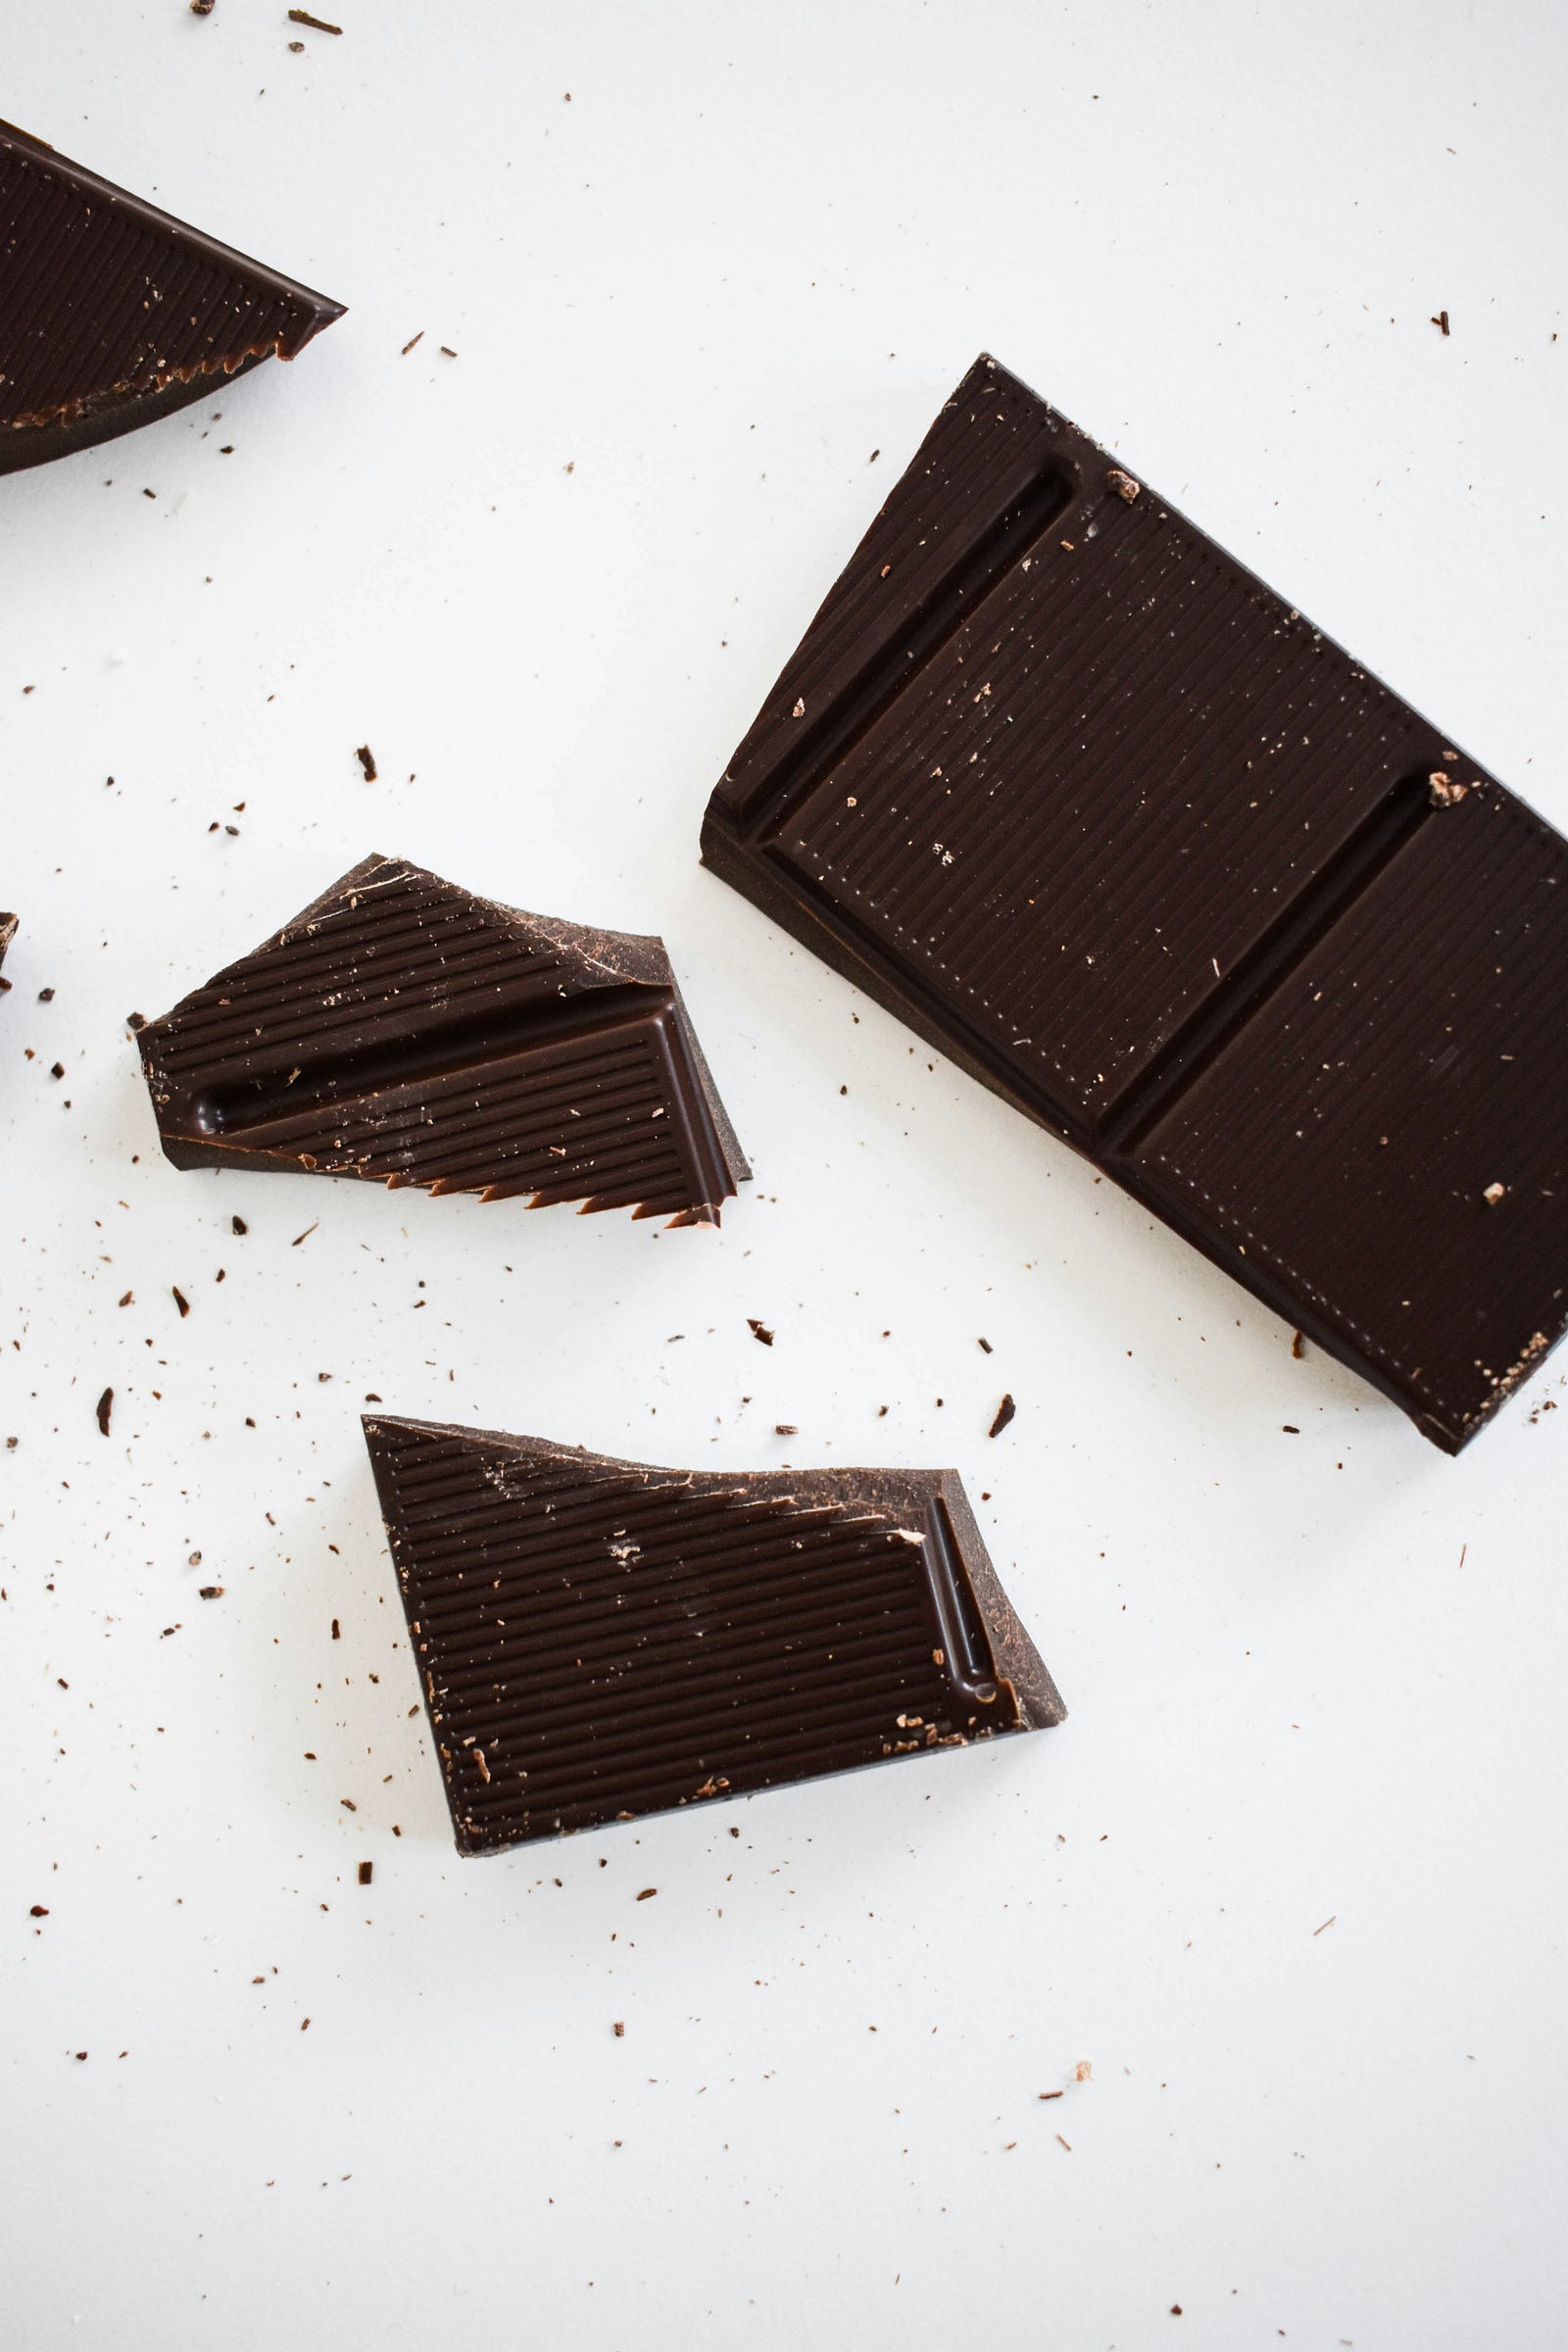 Pices of dark chocolate. Weight maintenance does not require sticking to a strict, rigid diet.